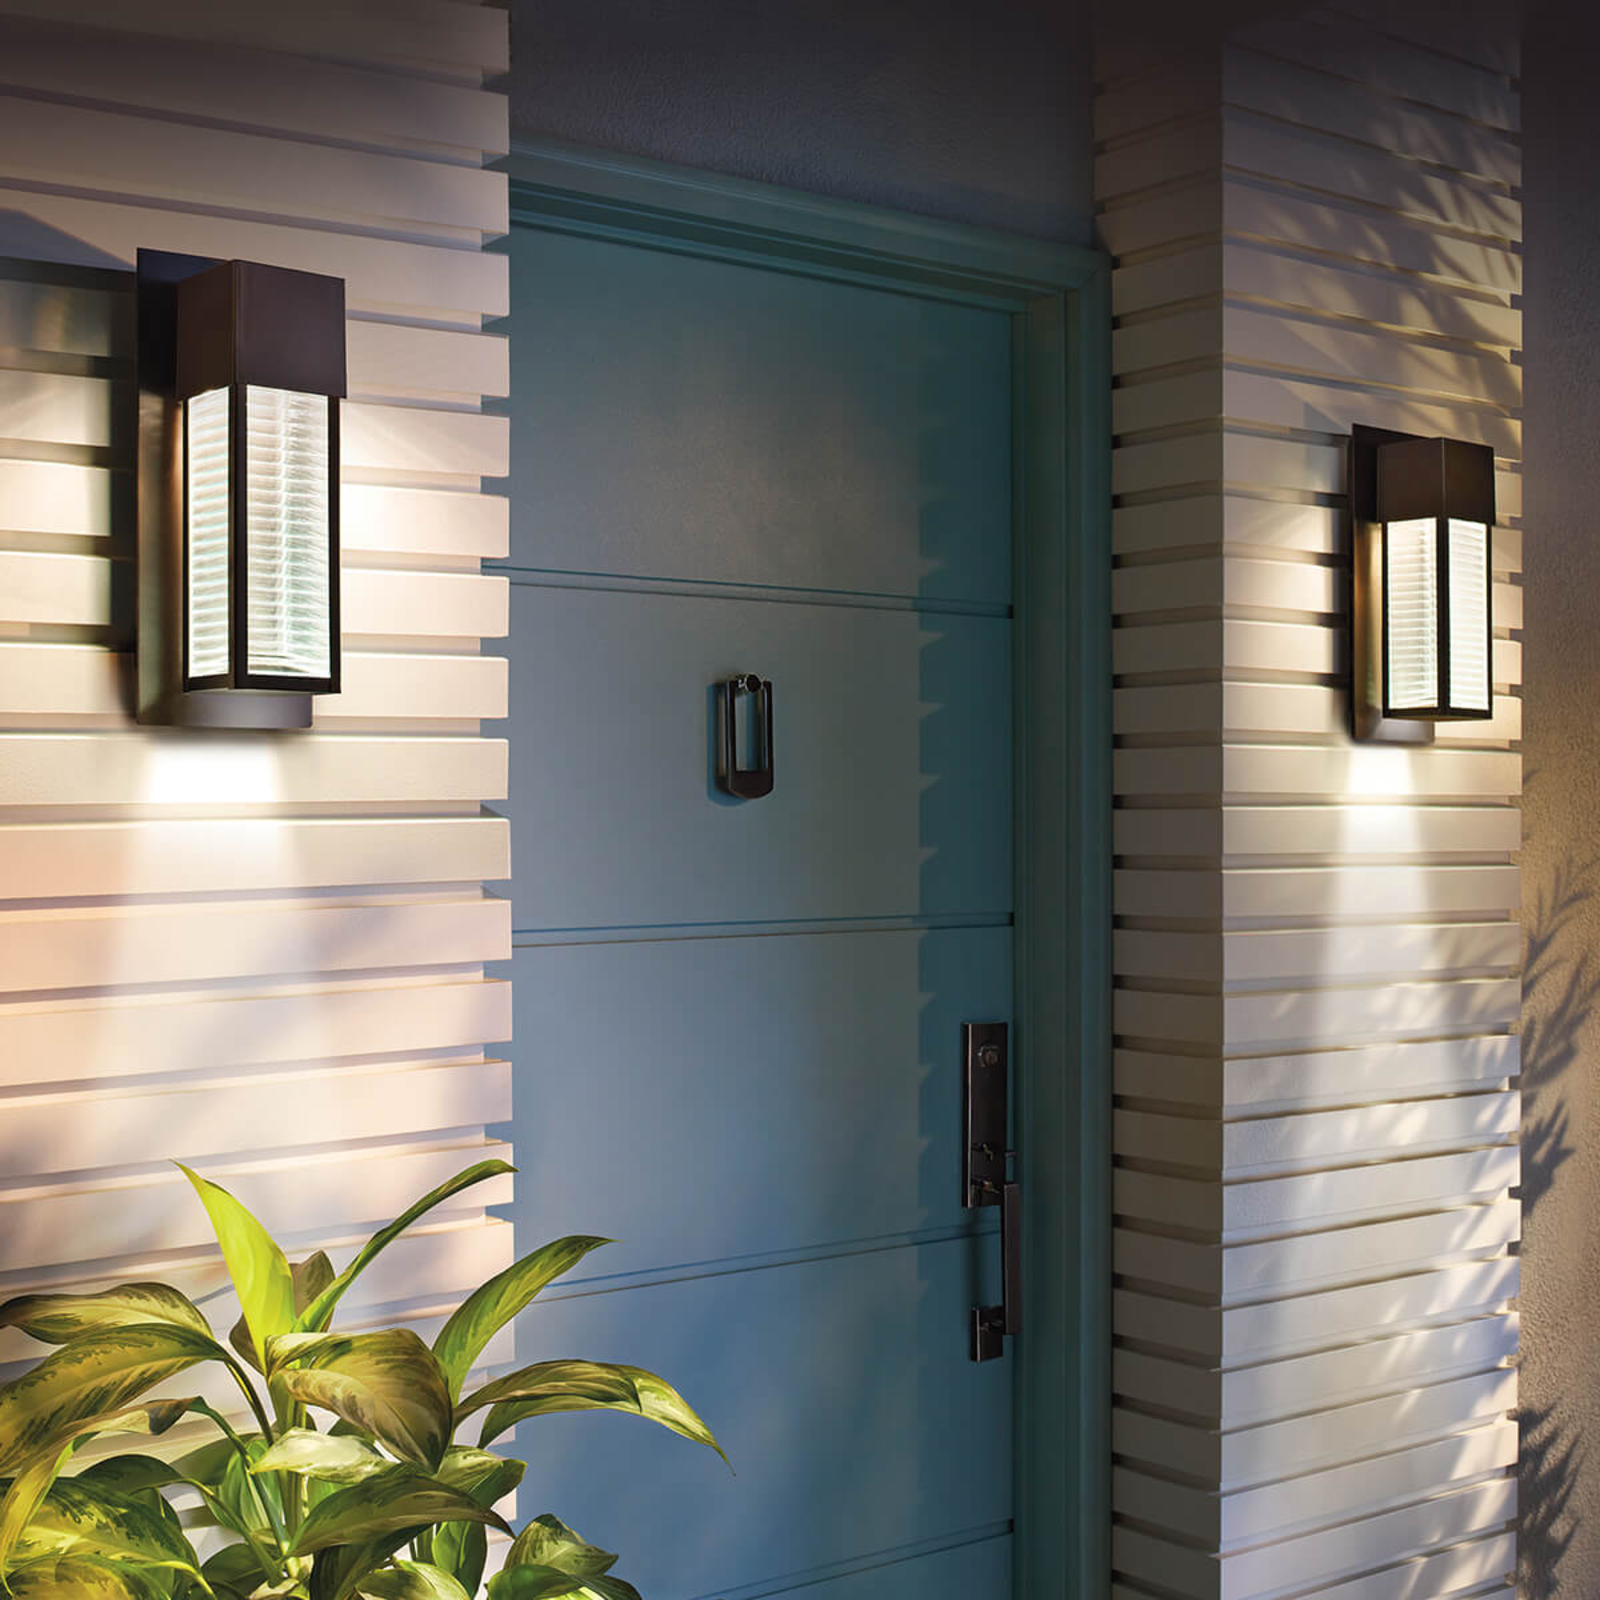 State-of-the-art Sorel LED wall light for outdoors